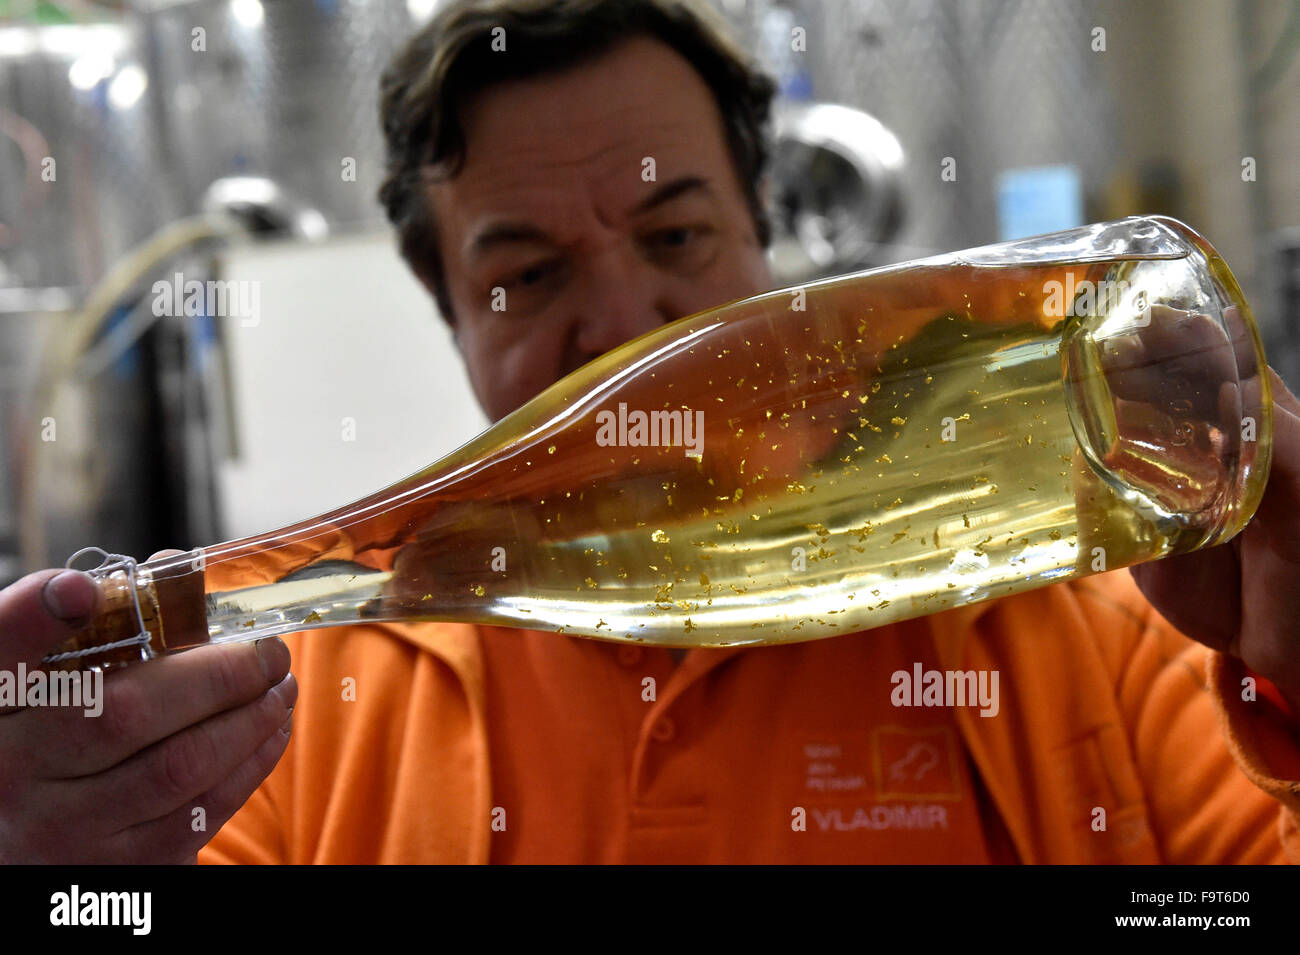 Kobyli, Czech Republic. 18th Dec, 2015. Vladimir Hribal (pictured) and his wife are the second generation of producers of the sparkling wine made from mostly ecologically grown hand-picked grapes. Family vinery Jan Petrak to create the most special sparkling wine, which is made using the classic Methode Champenoise - secondary fermentation in the bottle. Delicate and lasting sparkling is carried by flakes of 24 carat gold in Kobyli, Czech Republic, December 18, 2015. © Vaclav Salek/CTK Photo/Alamy Live News Stock Photo